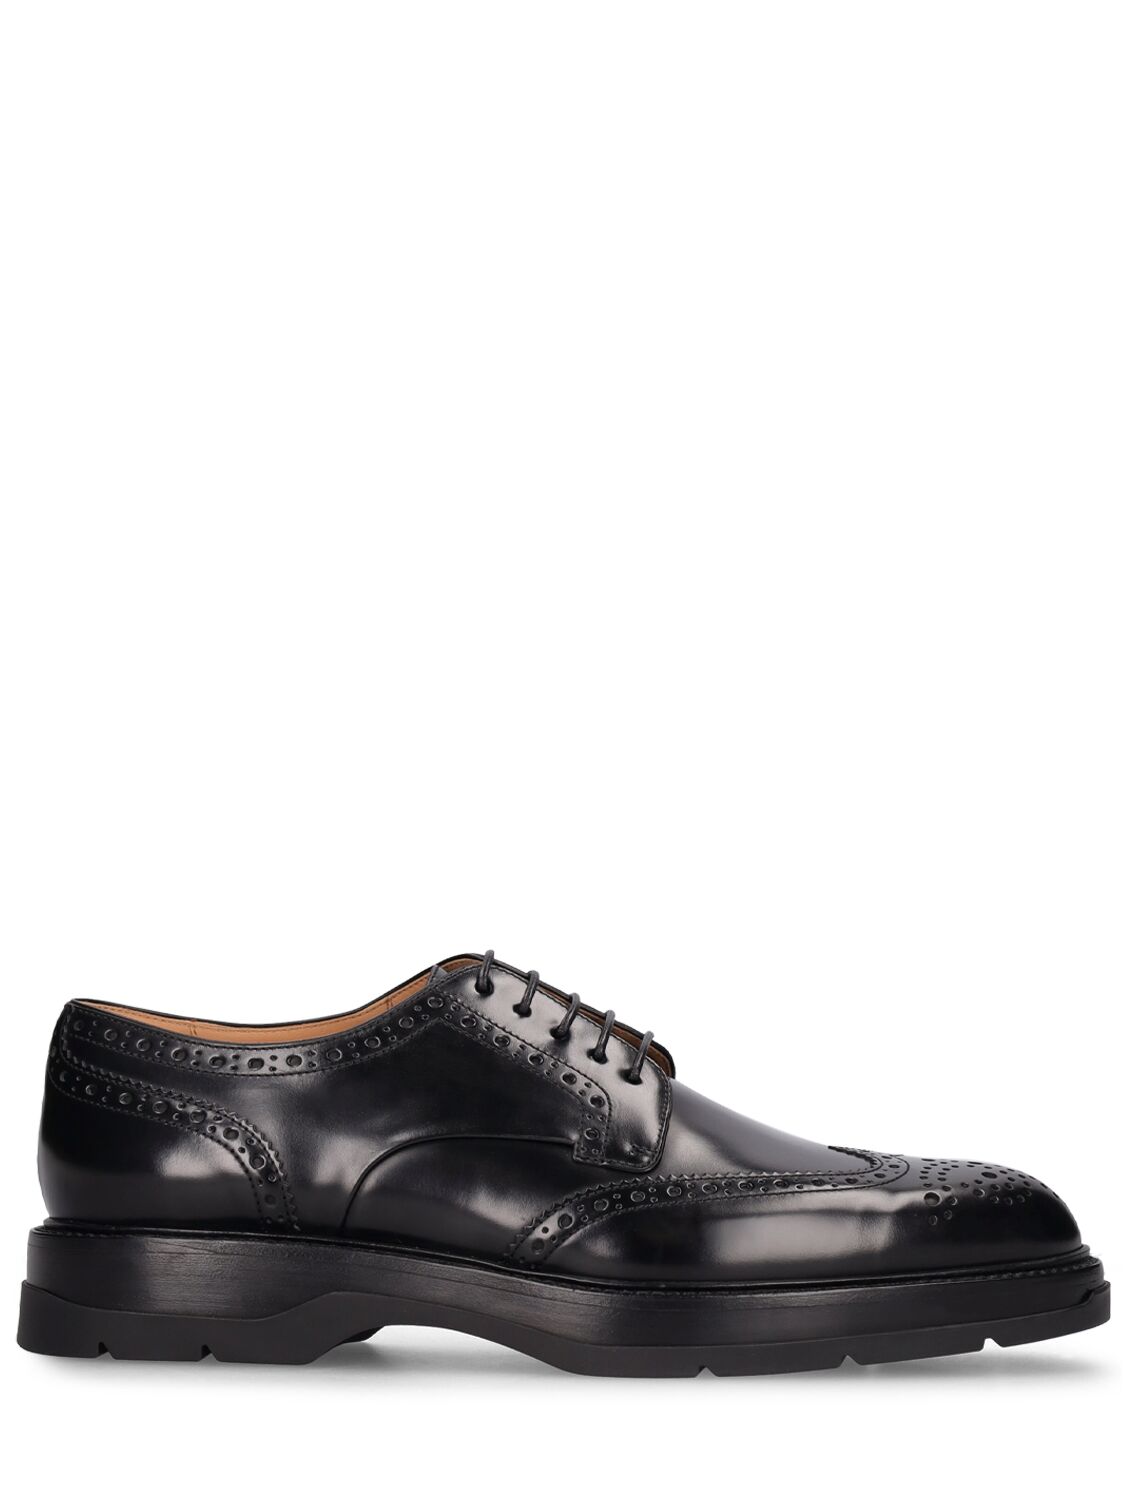 DUNHILL HYBRID BROGUE DERBY SHOES